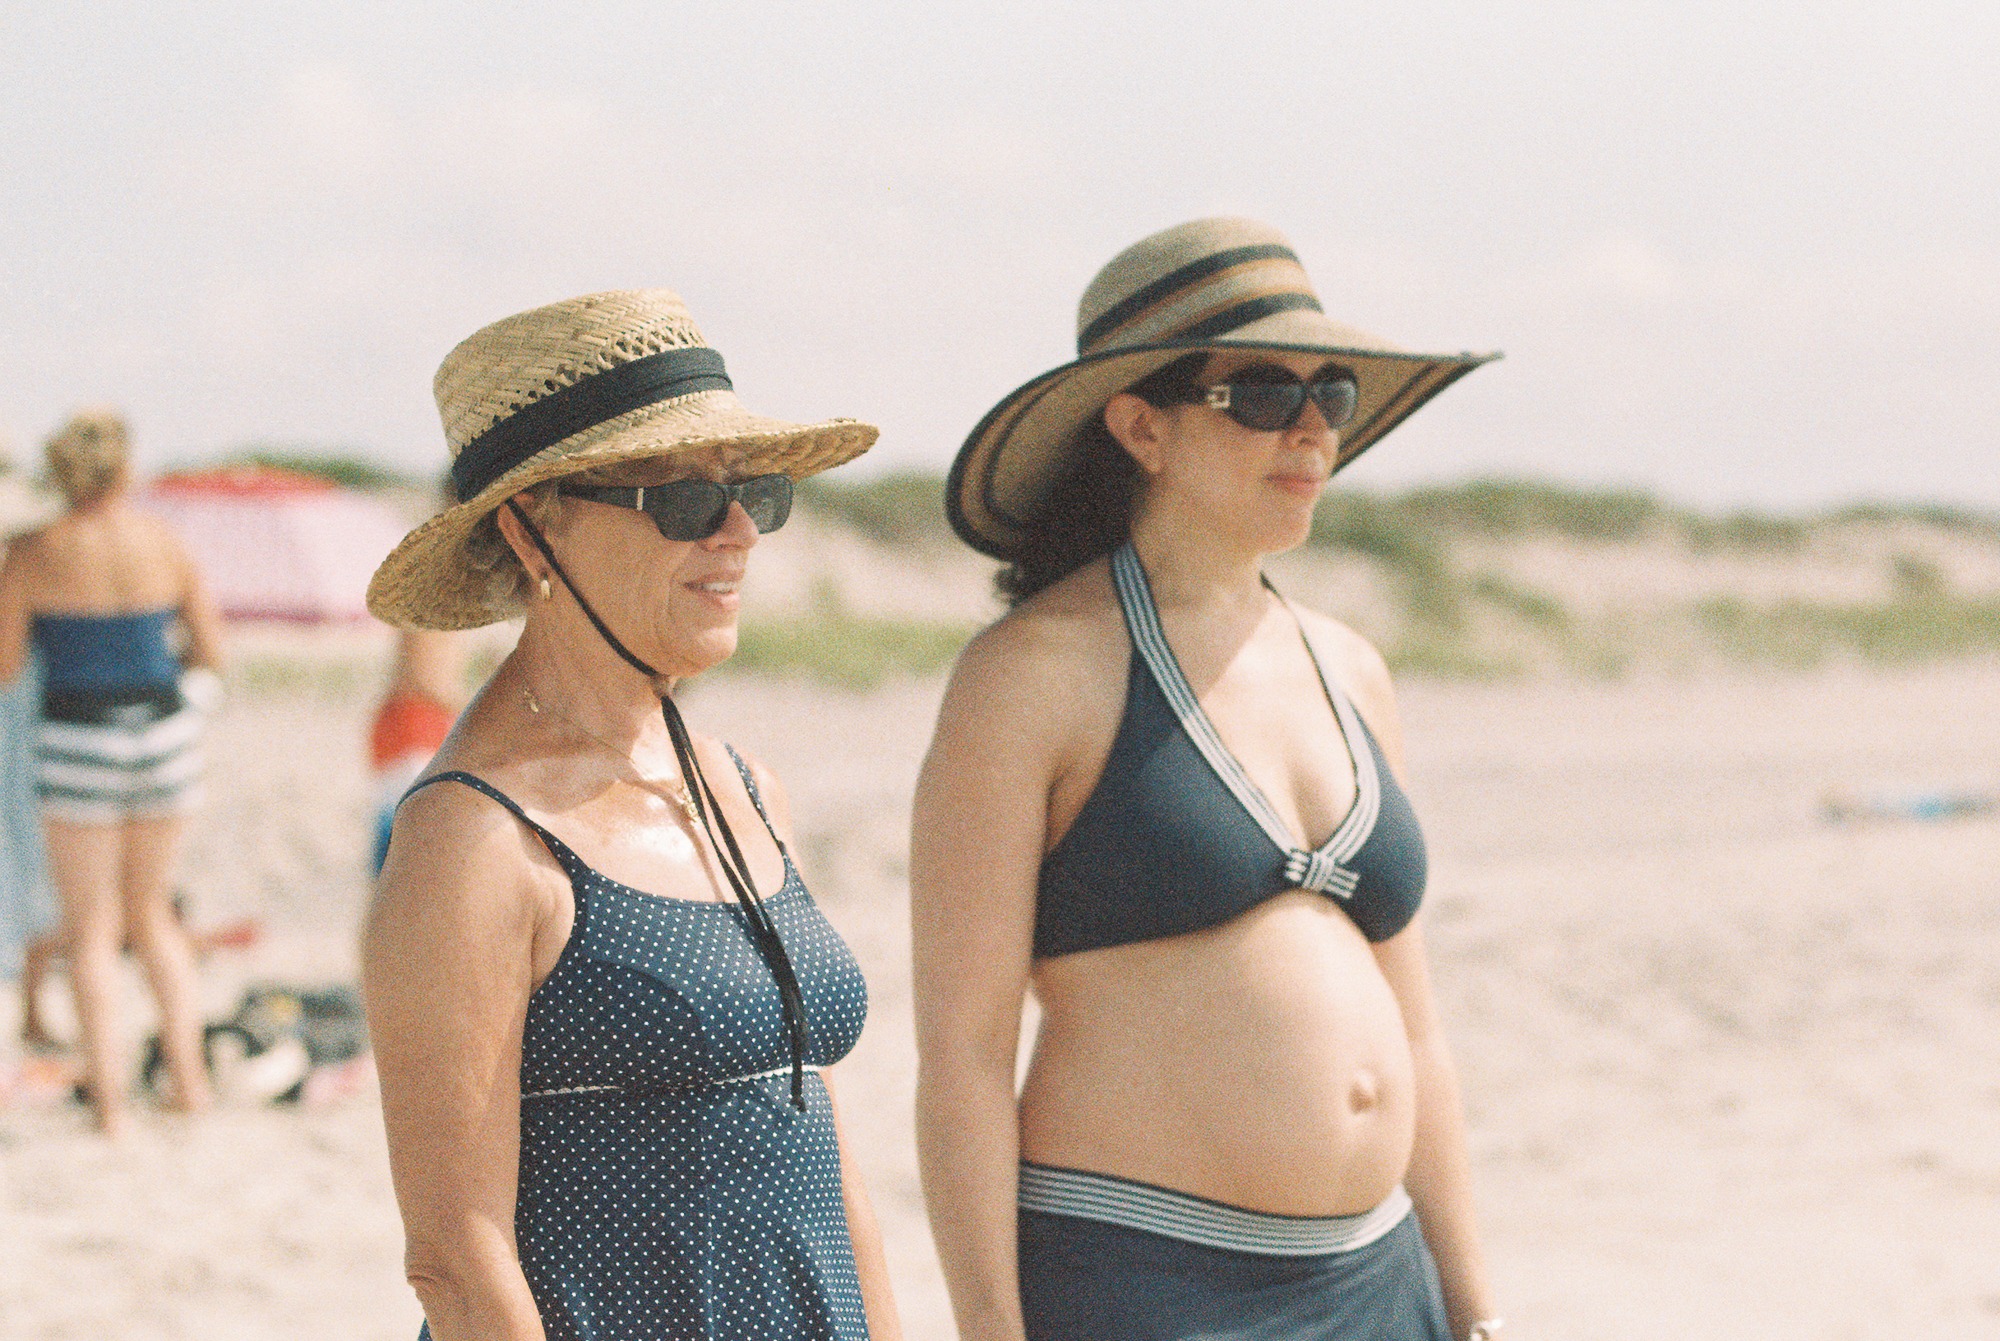 Film scan of two women looking out towards the ocean on New York's Fire Island